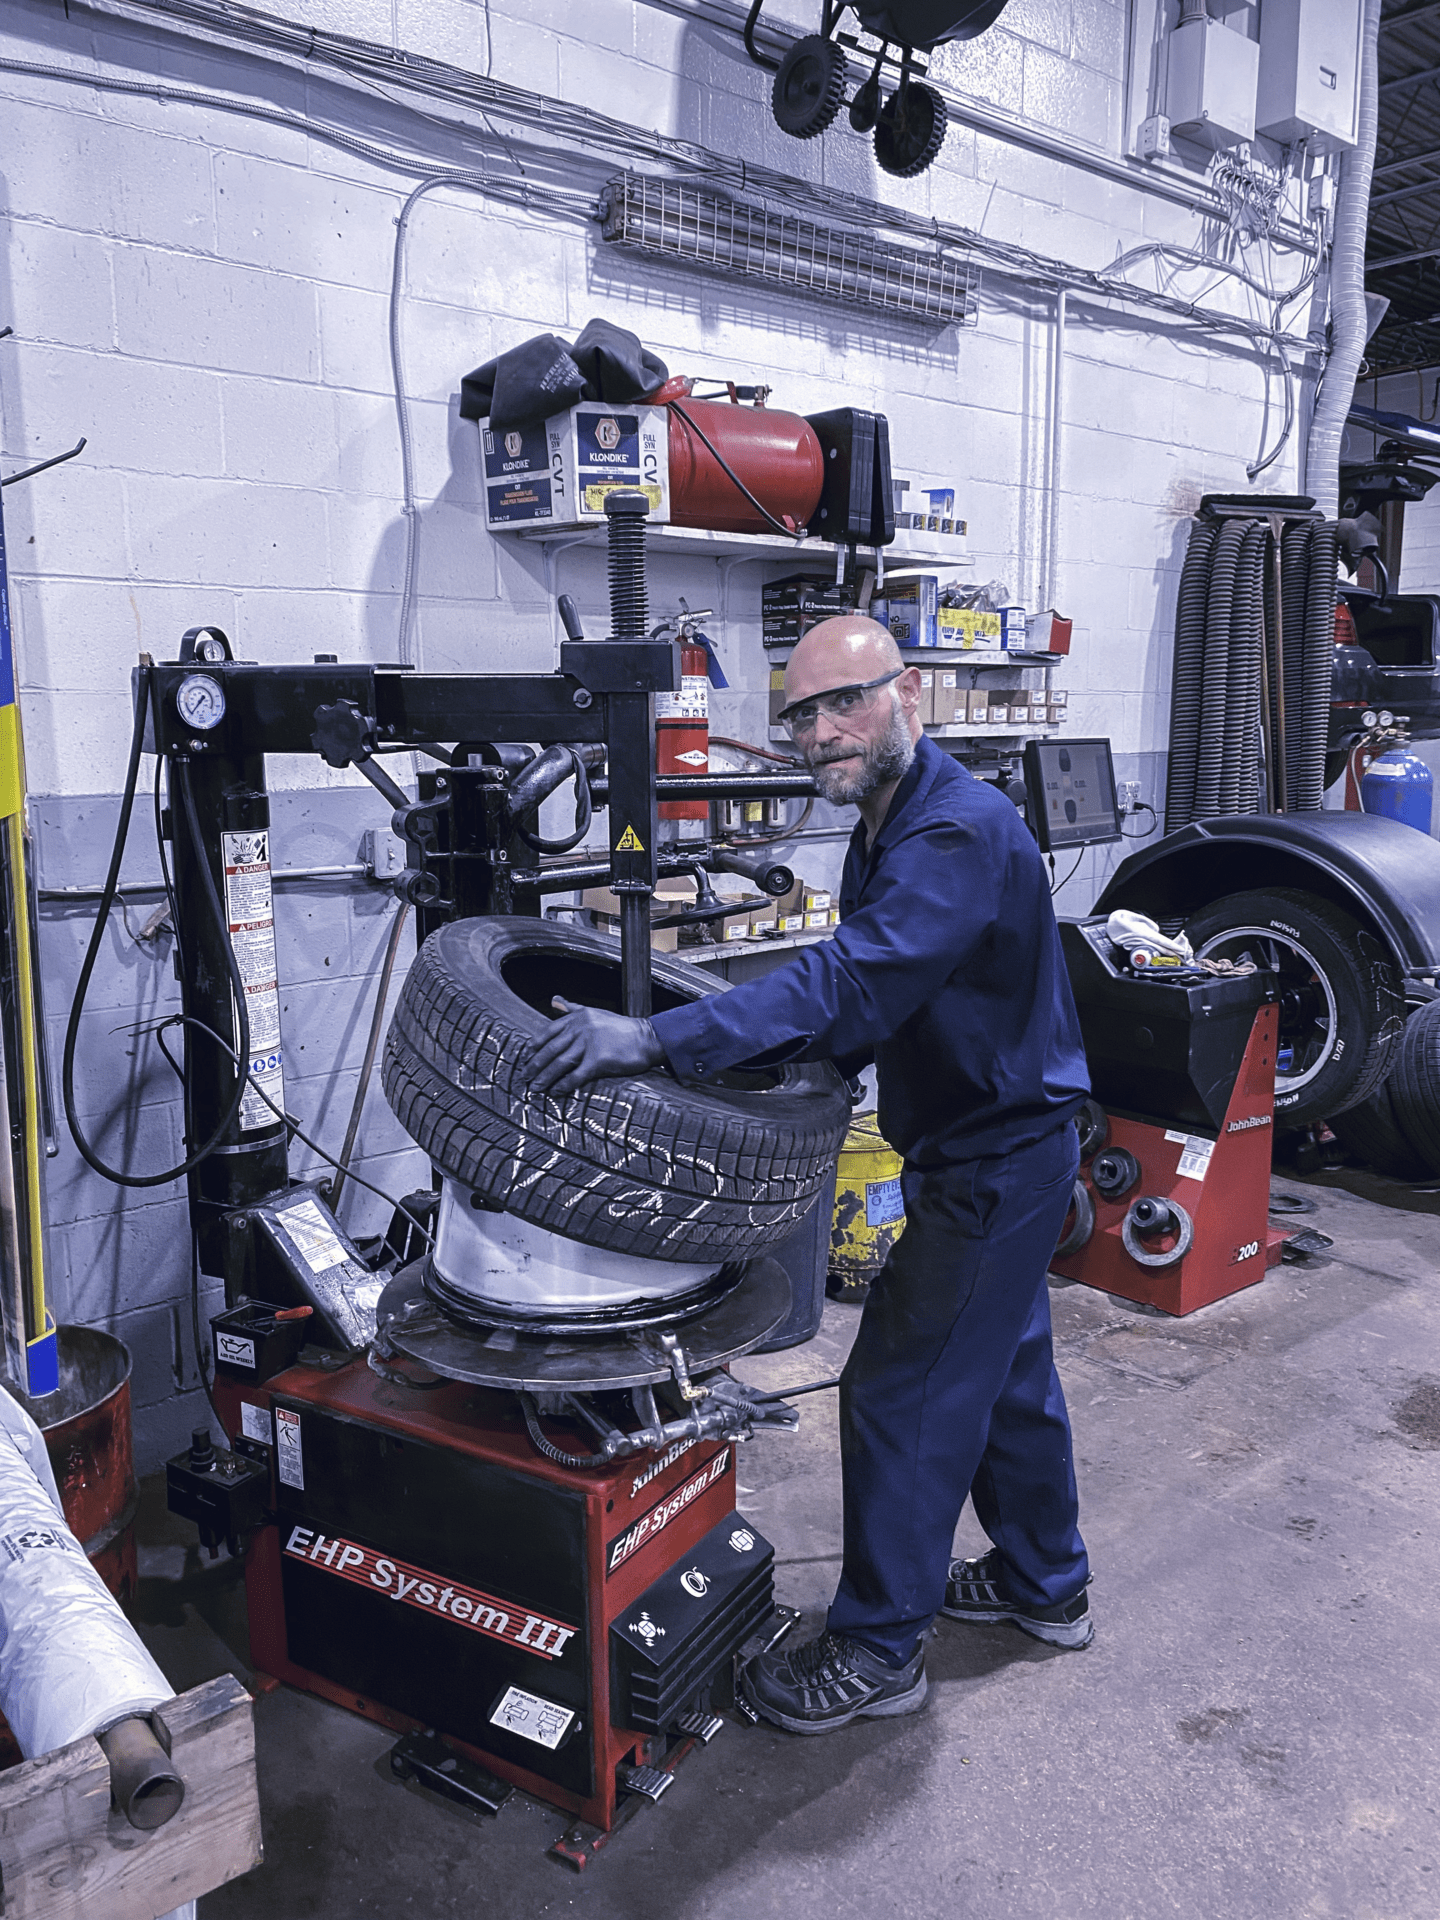 A person in a blue uniform is operating a tire changing machine in a well-equipped workshop. Tools, tires, and industrial equipment are visible.